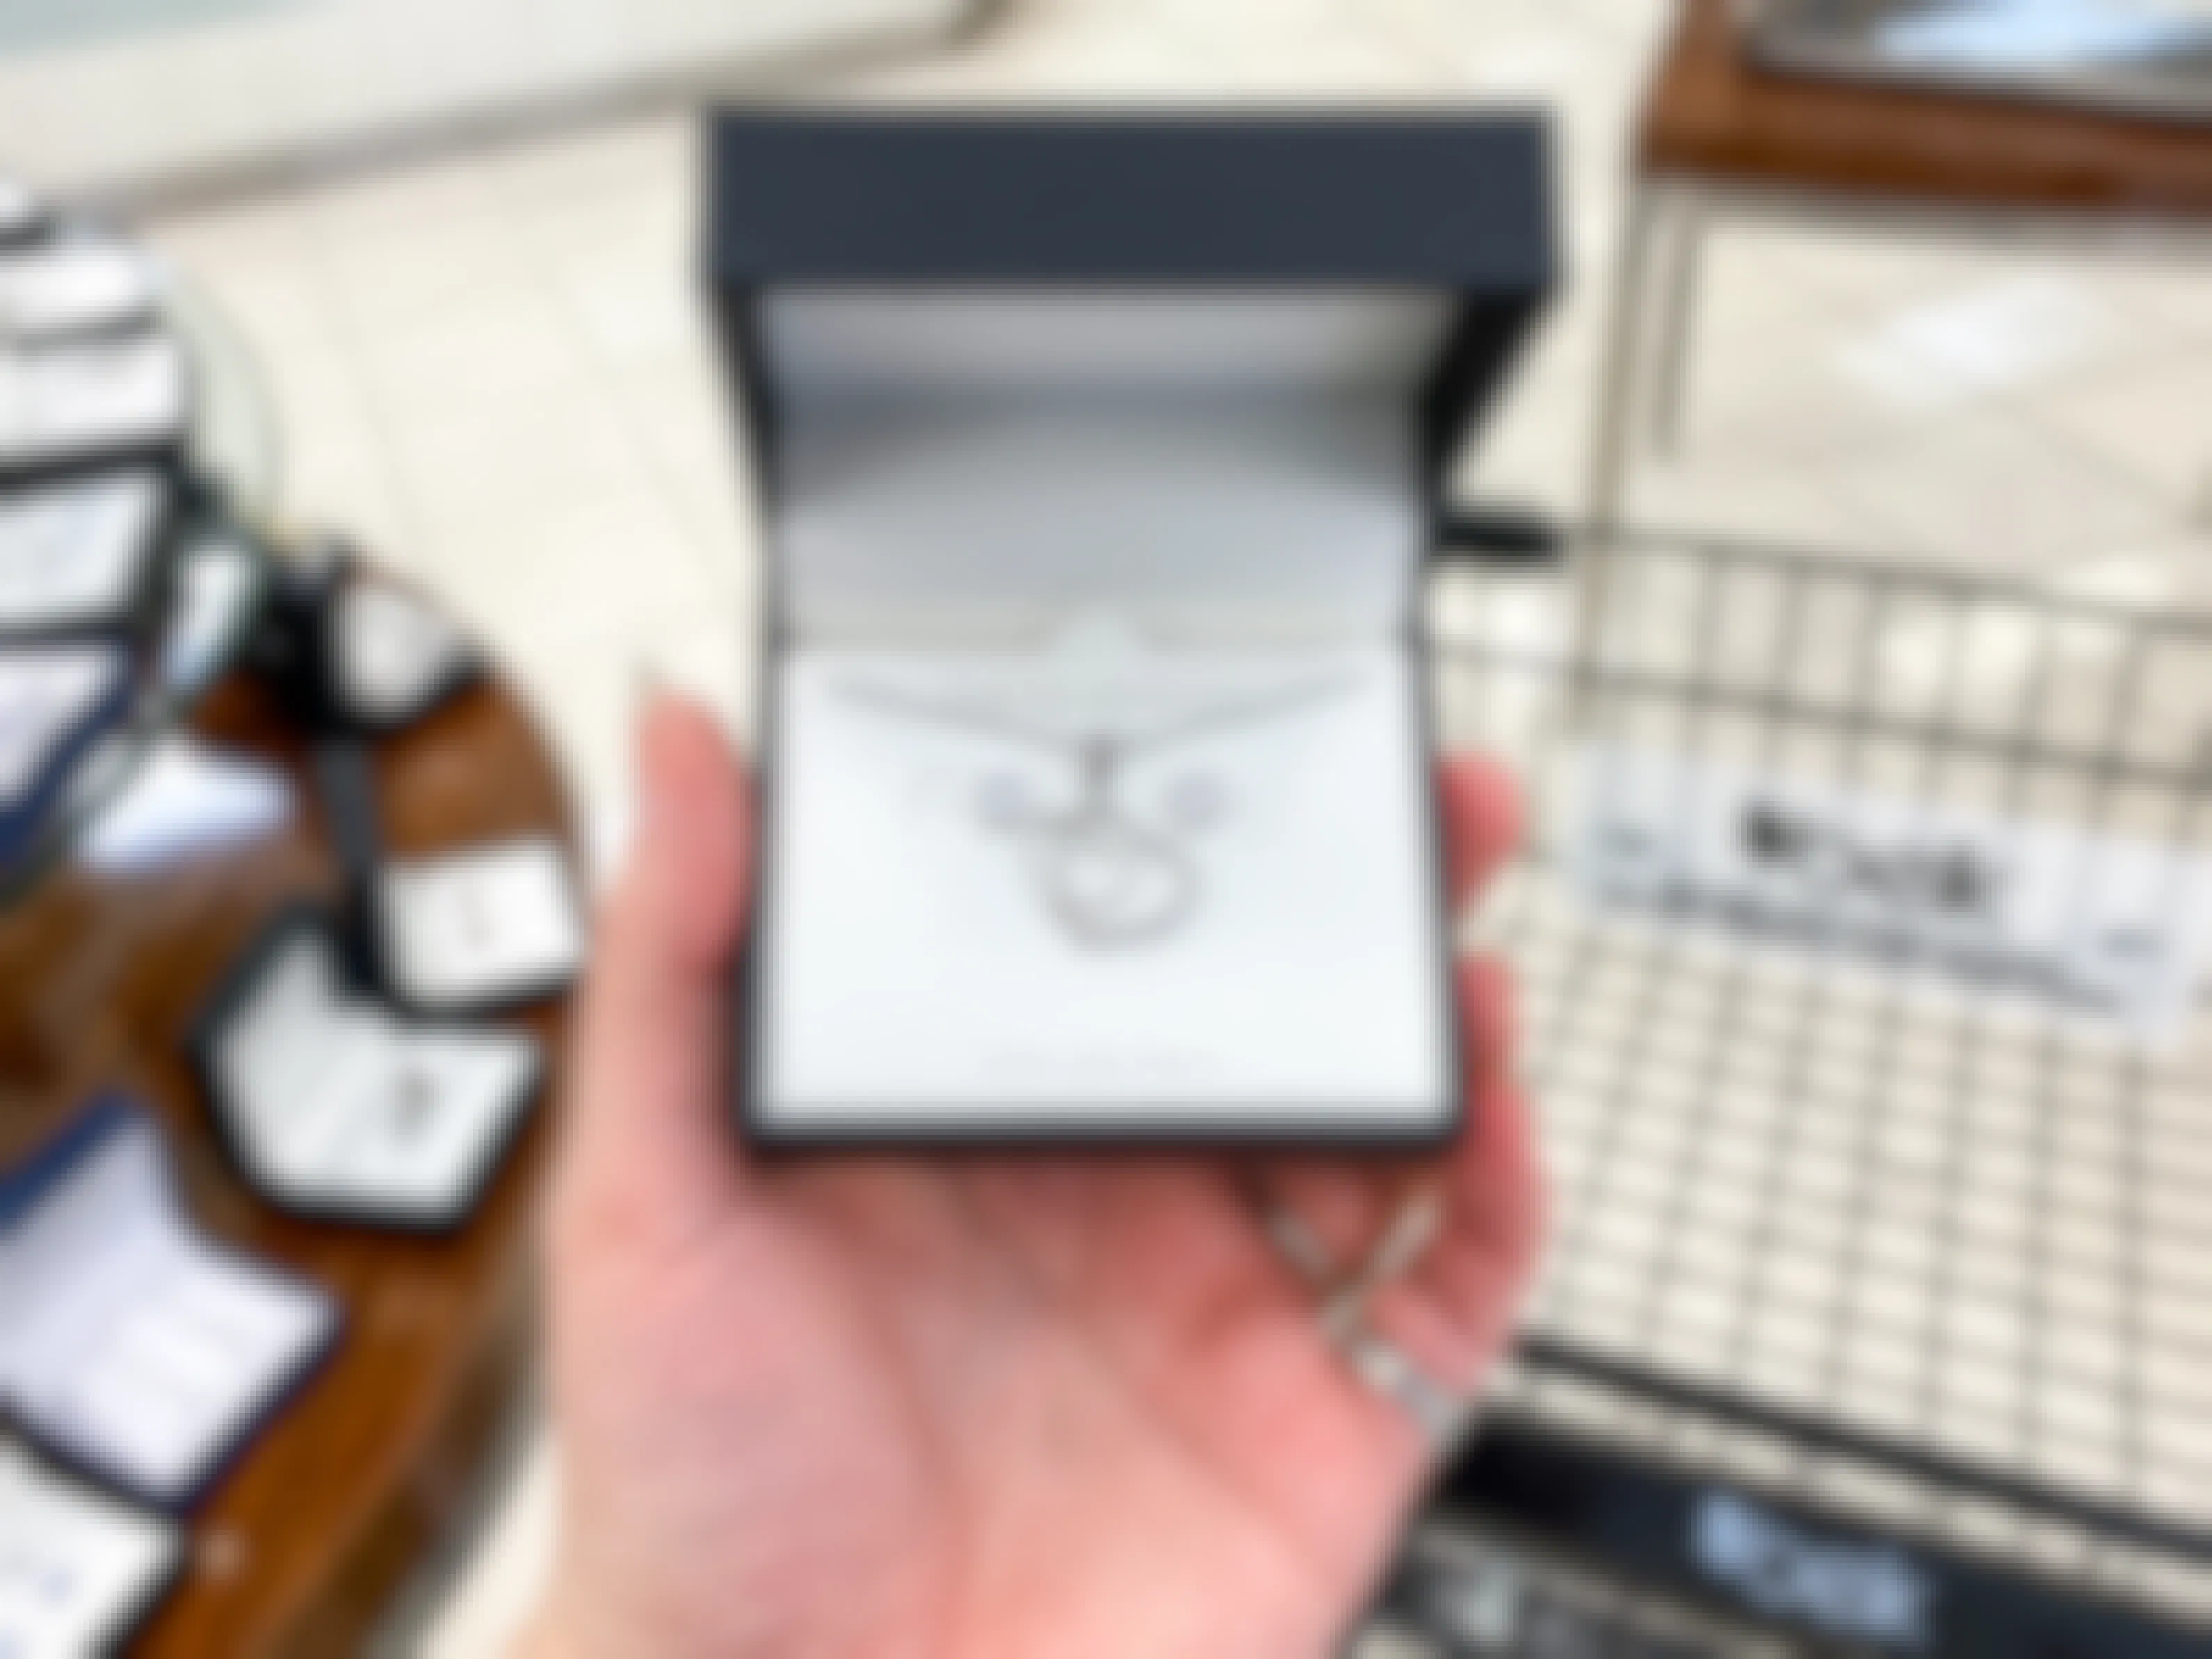 A person's hand holding a jewelry set box in front of a shelf and cart at Belk.